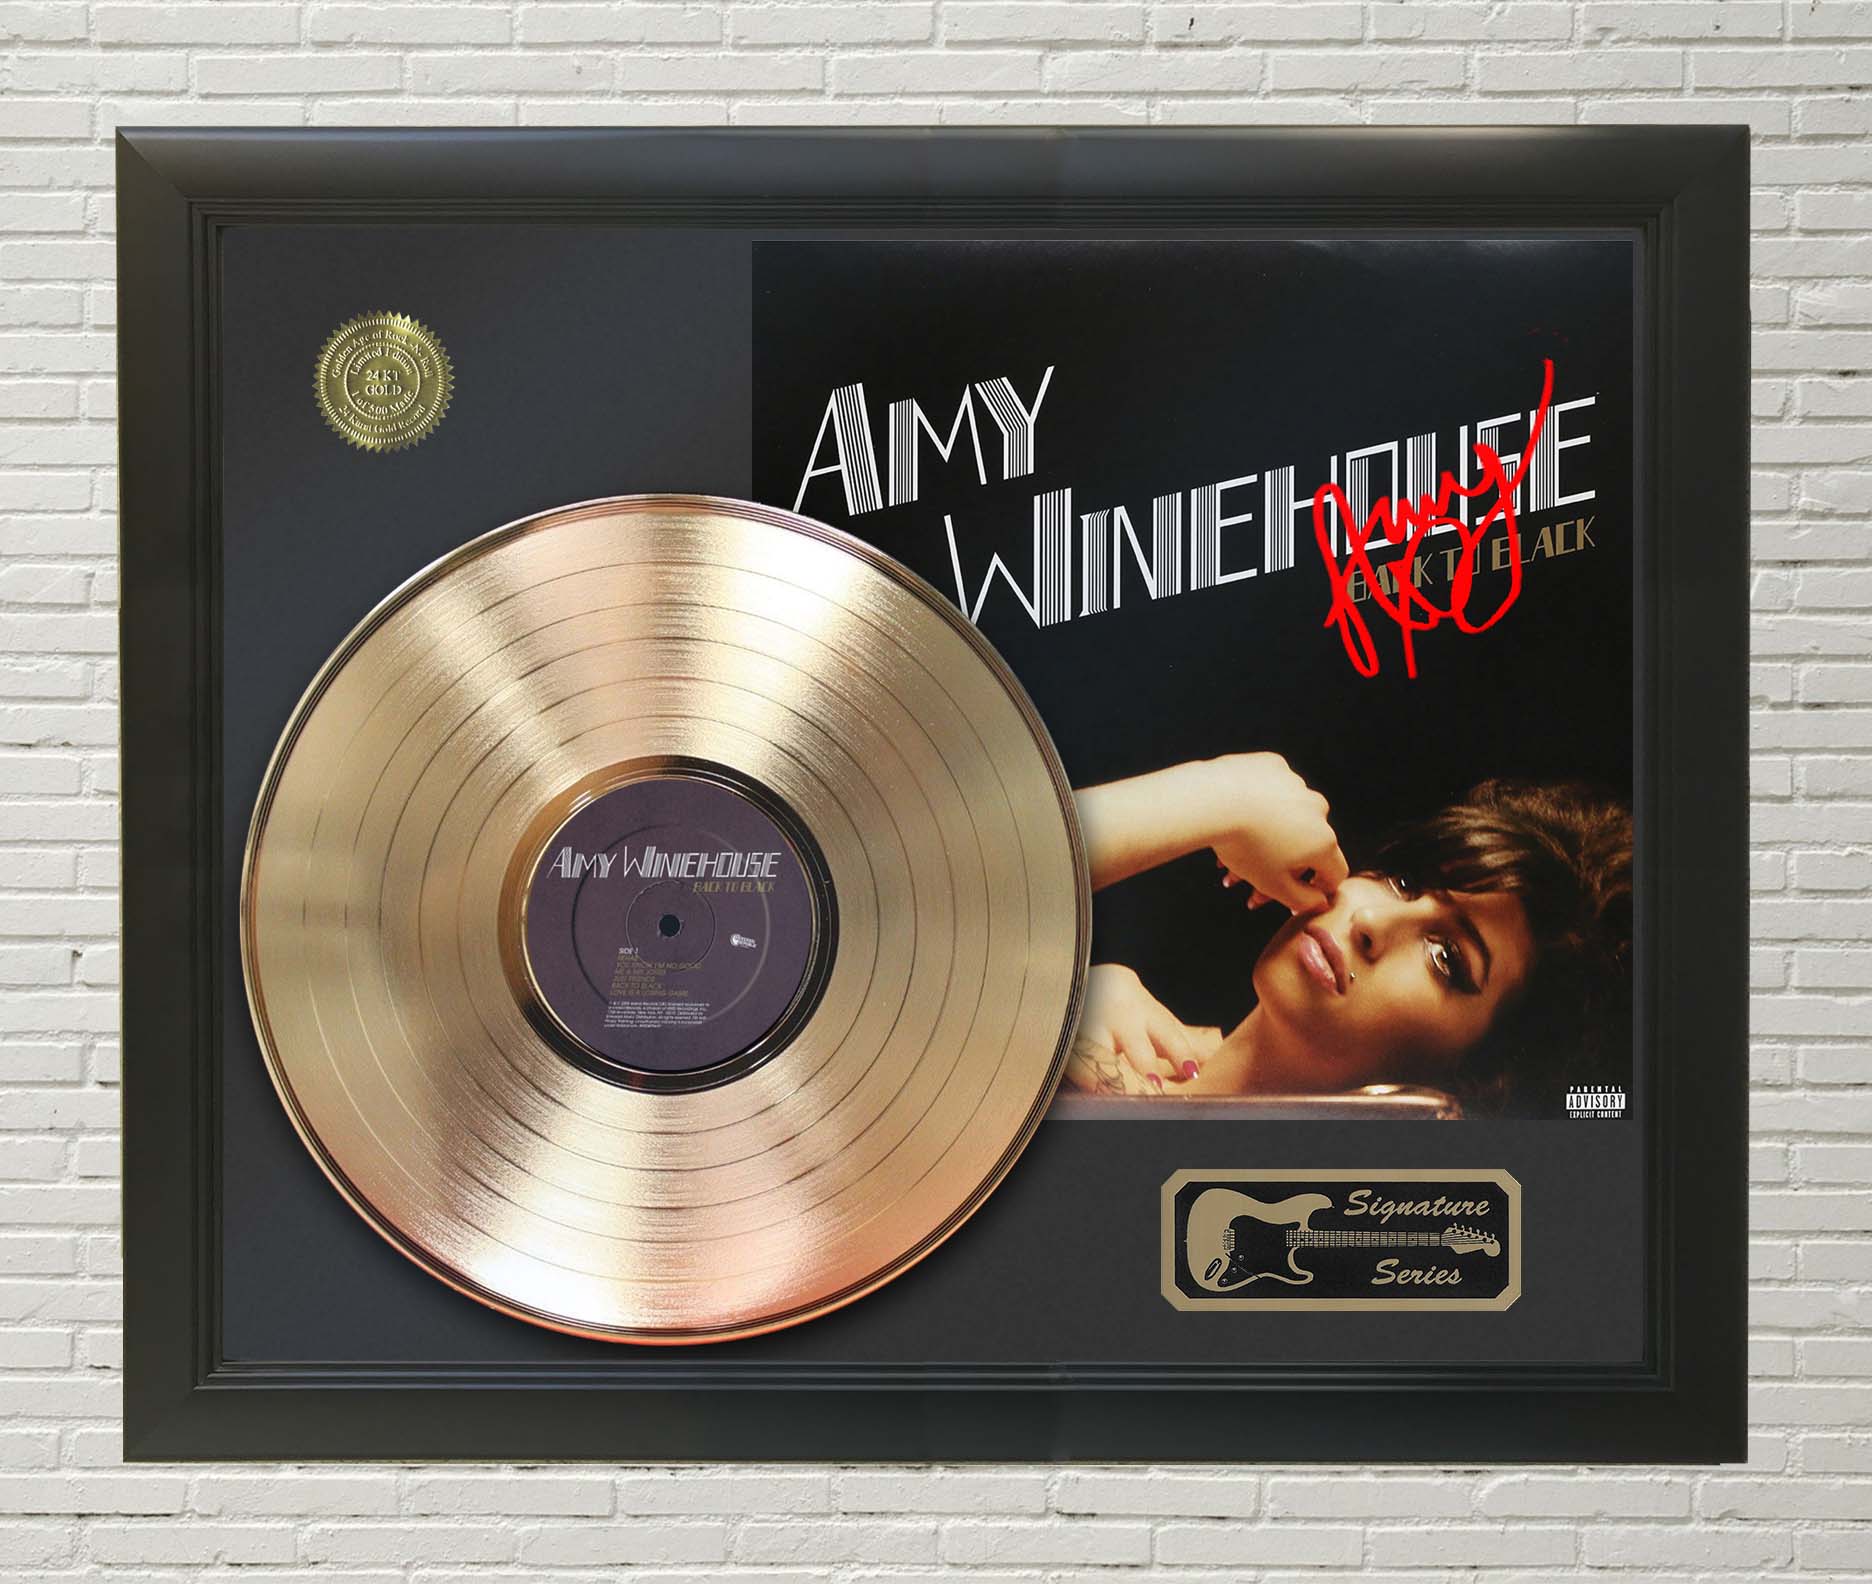 Winehouse - Back To Black Framed Signature Gold LP Record Display M4 Gold Outlet Album and Disc Collectible Memorabilia